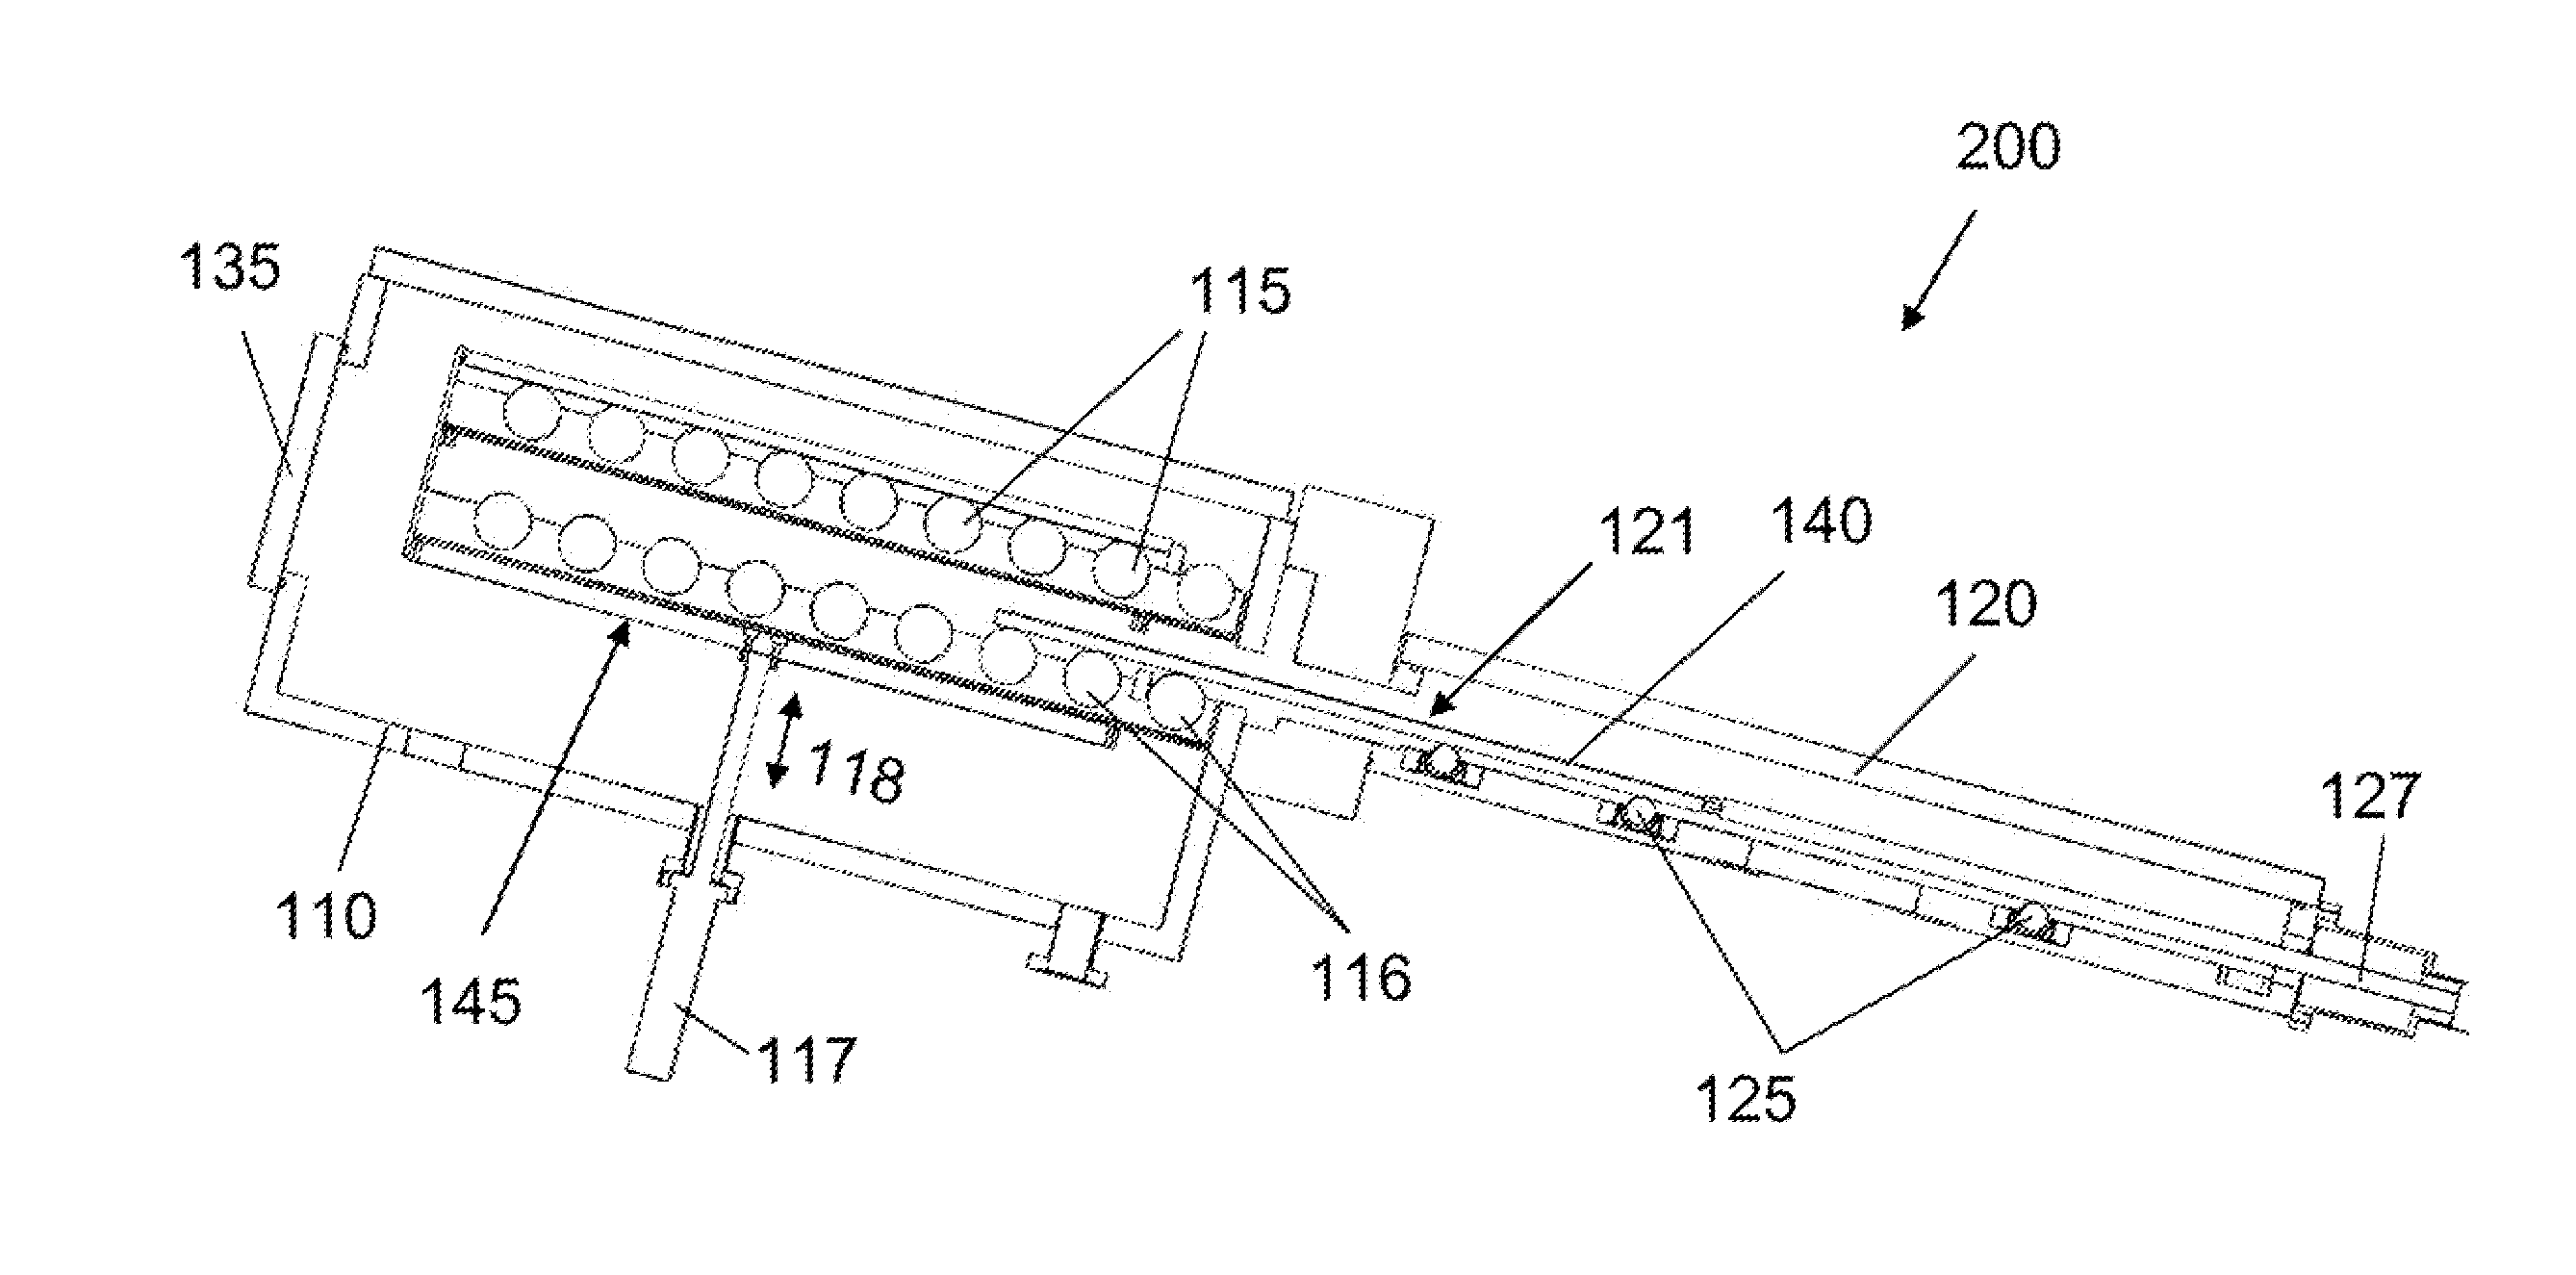 Substrate processing system having improved substrate transport system